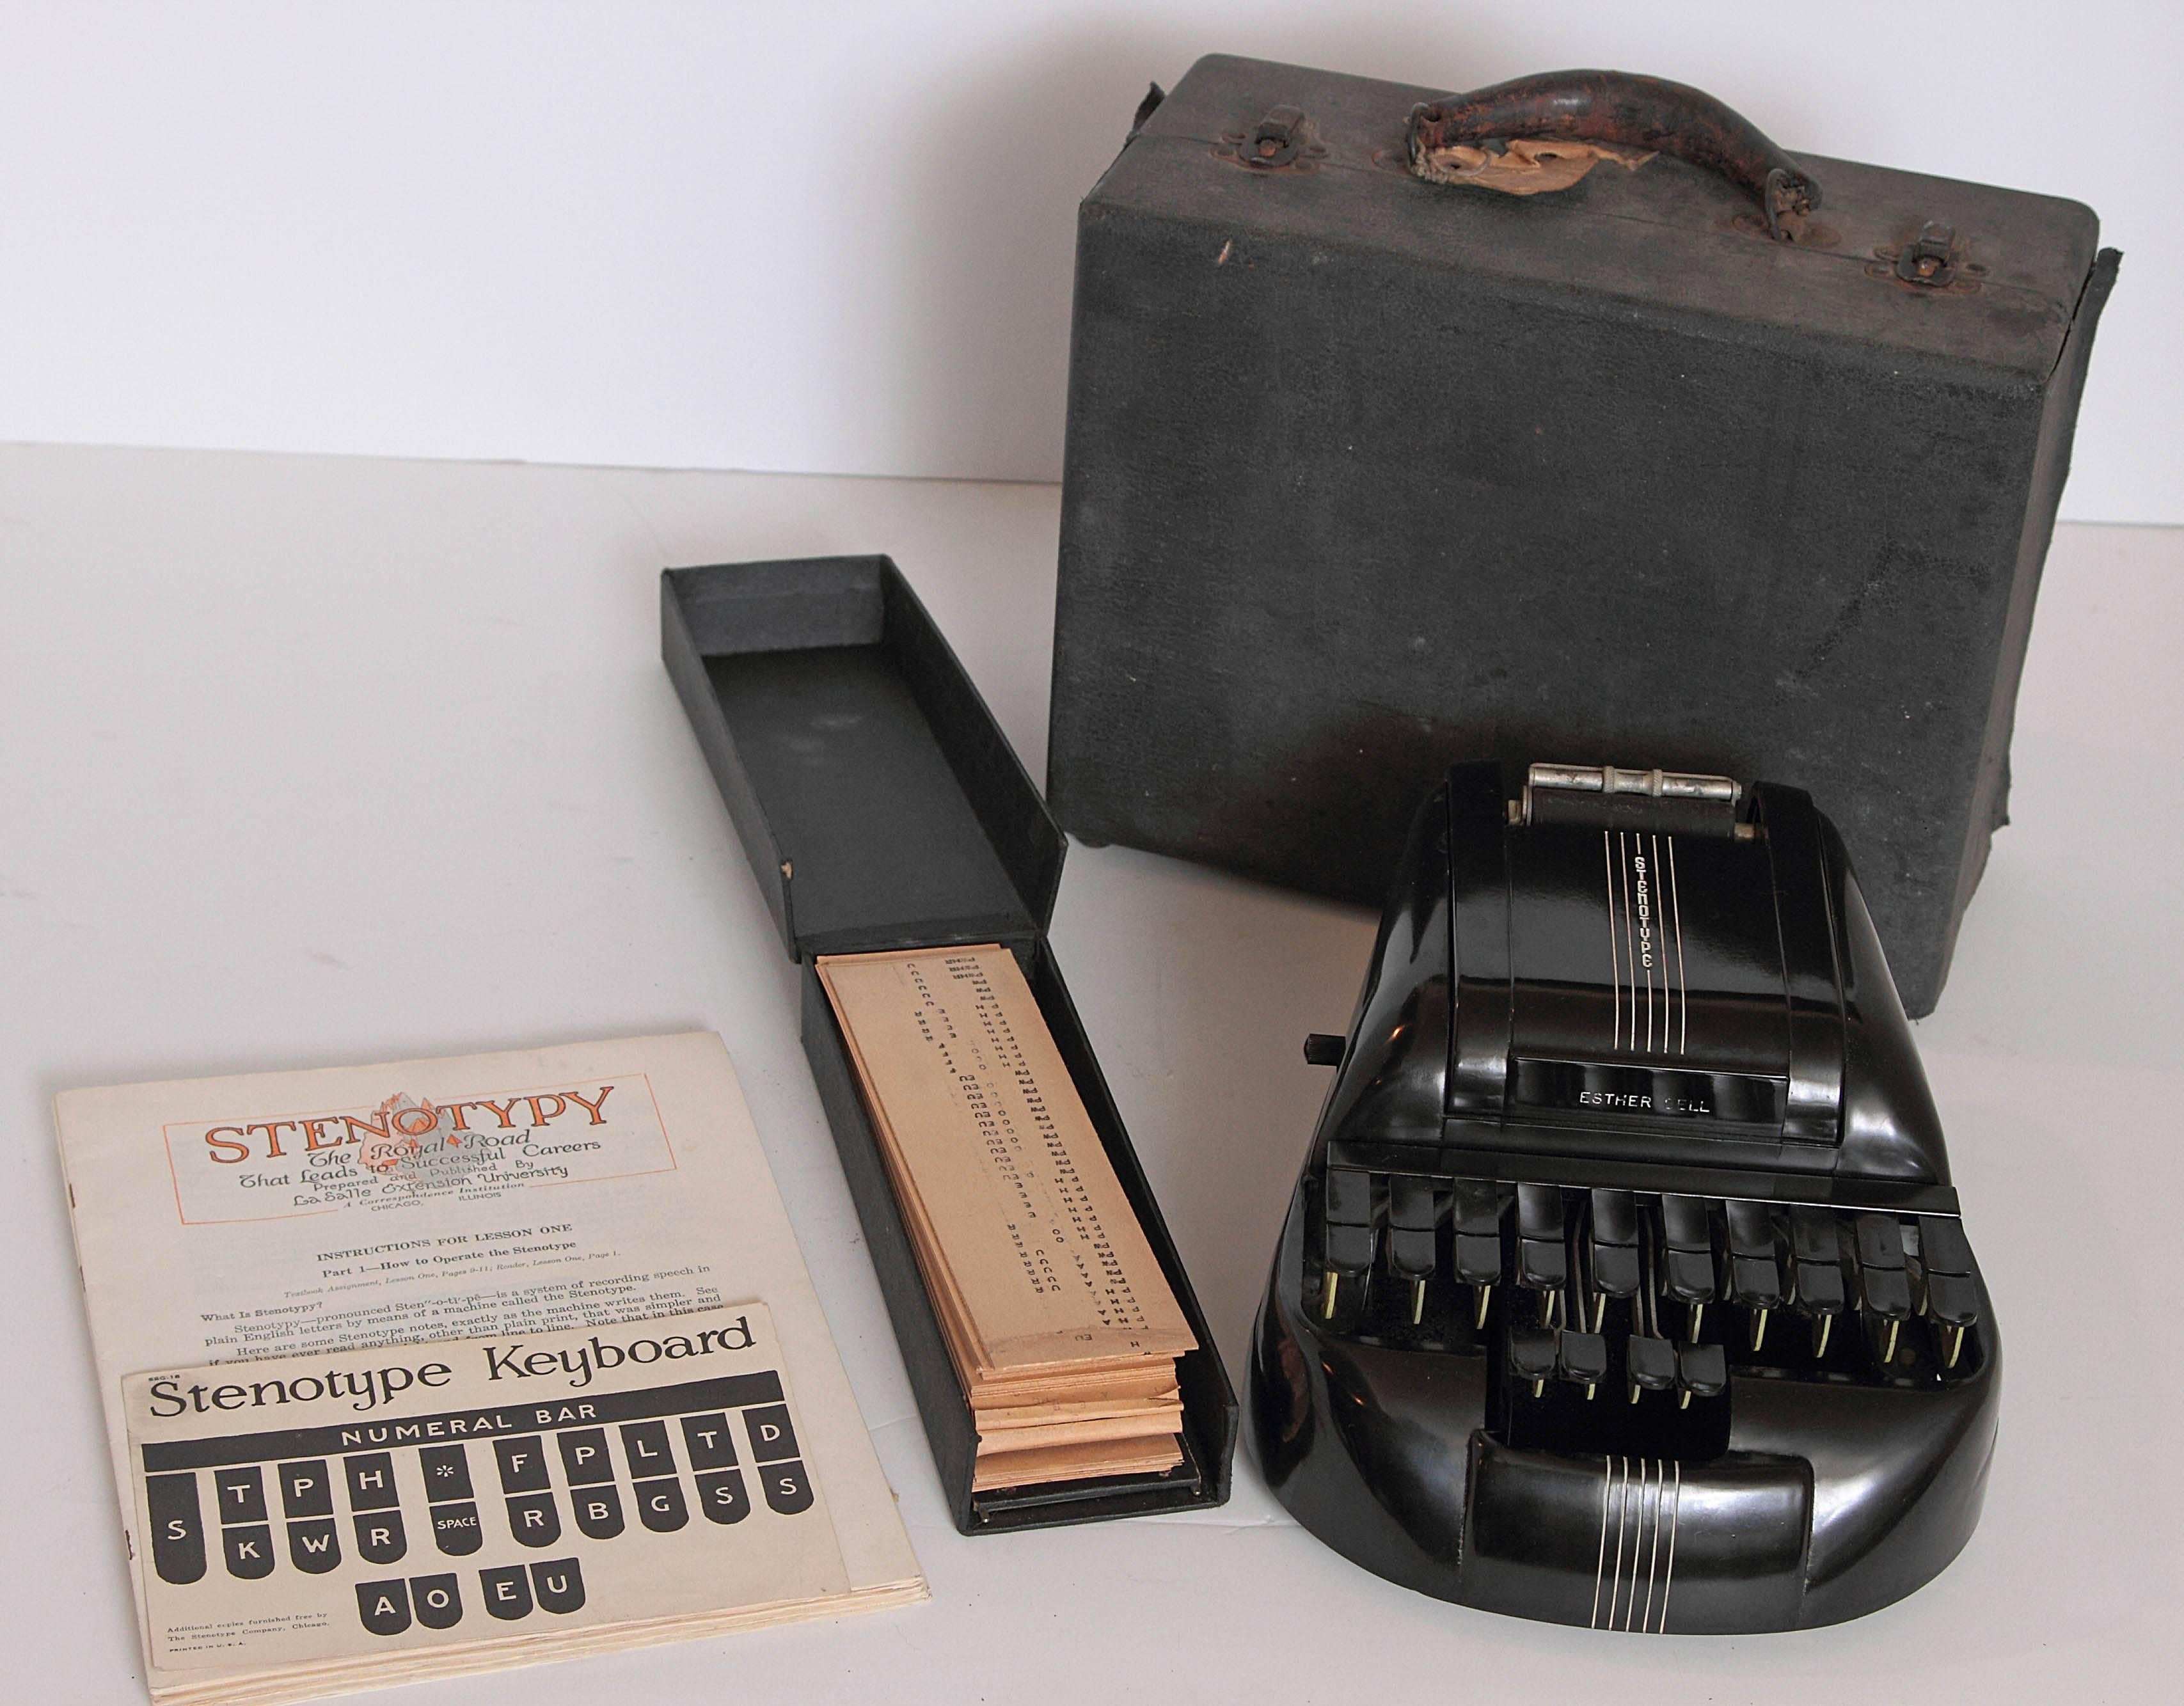 Machine Age Art Deco Streamline Black Bakelite Stenography Set circa 1939  PRICE REDUCED

William Petzold's extreme industrial re-design for The Stenotype Company.
Patent granted in 1940 to Petzold, assignor to General Electric.
One of our favorite